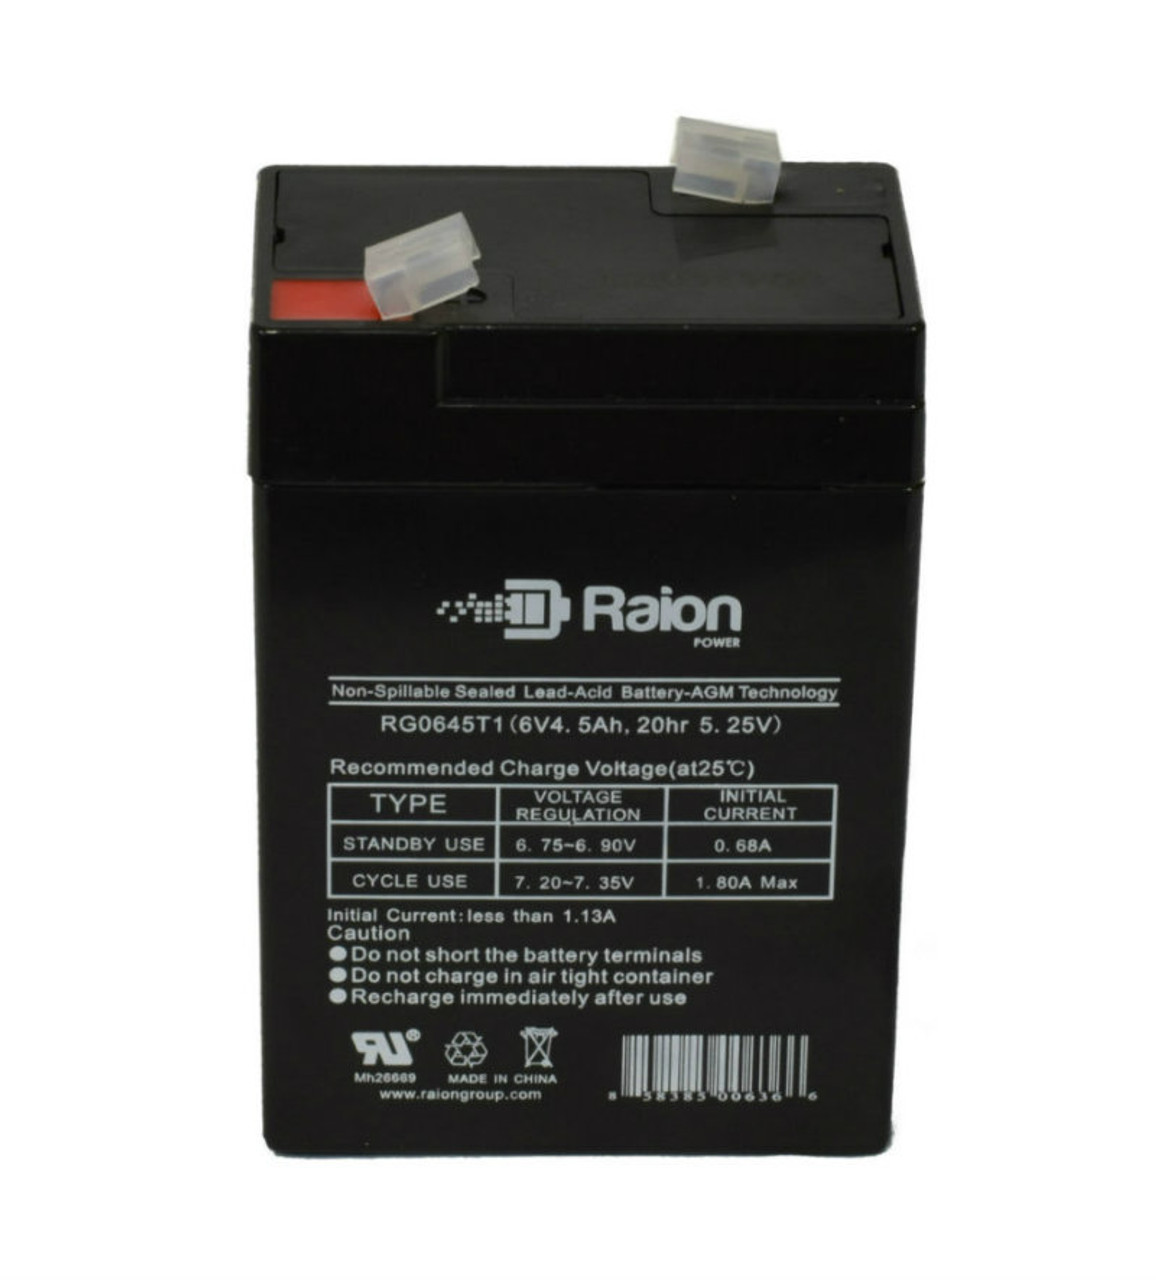 Raion Power RG0645T1 Replacement Battery Cartridge for Chloride E88